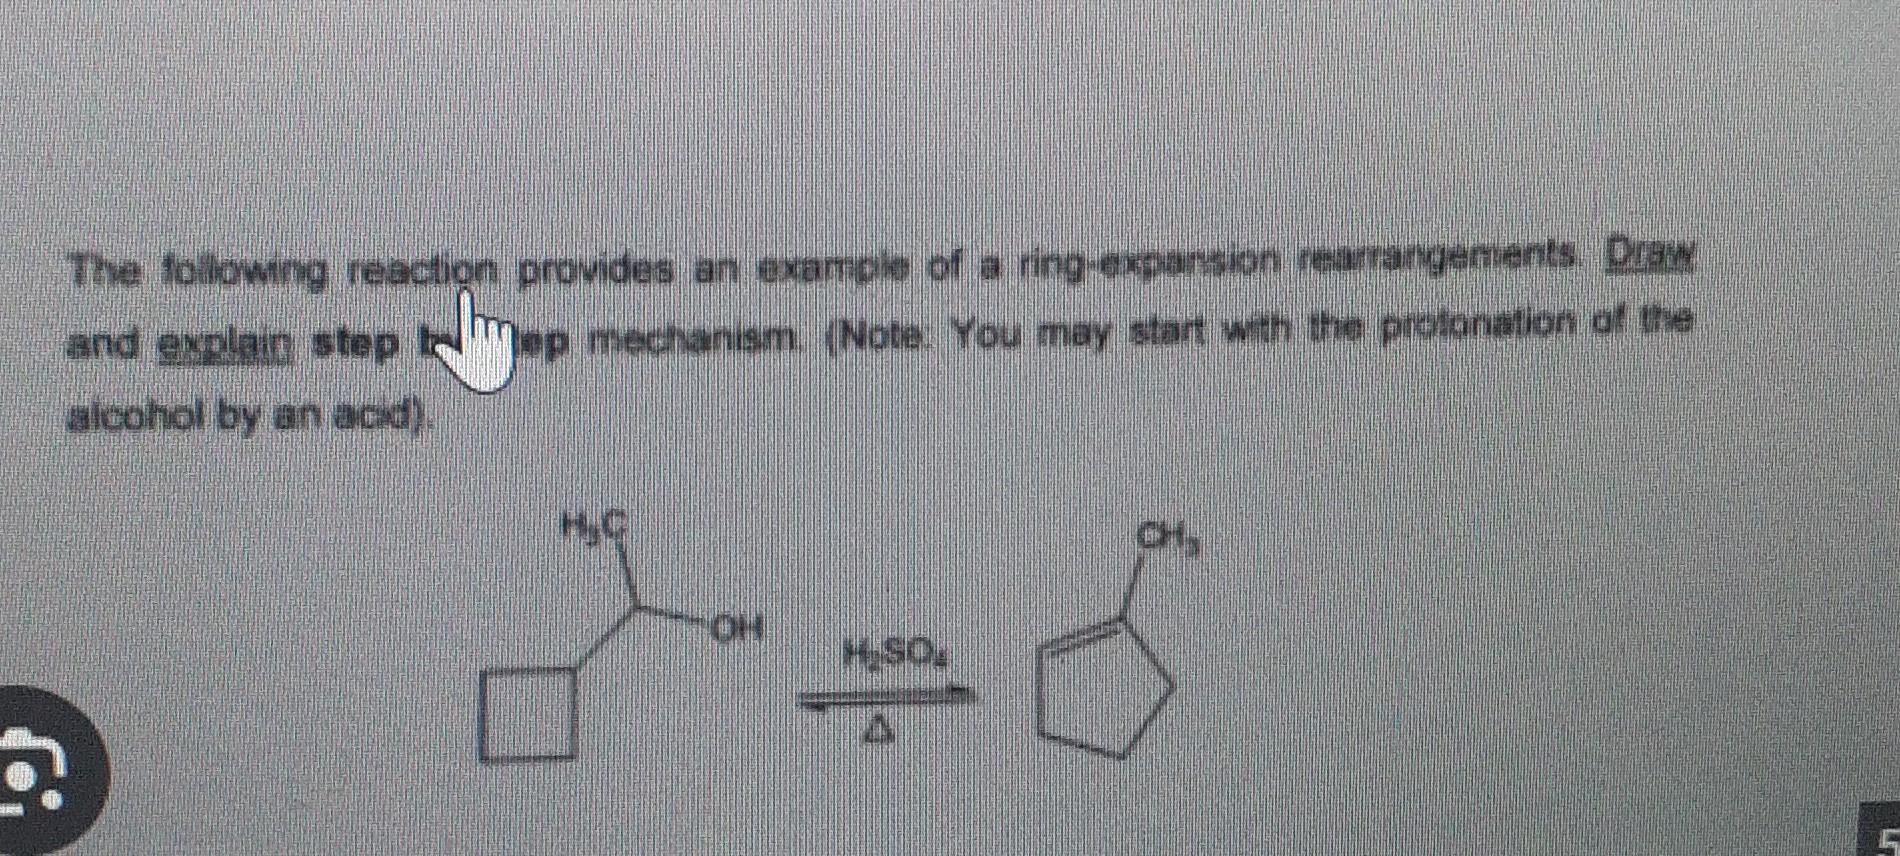 Why isn't ring expansion possible here? : r/OrganicChemistry